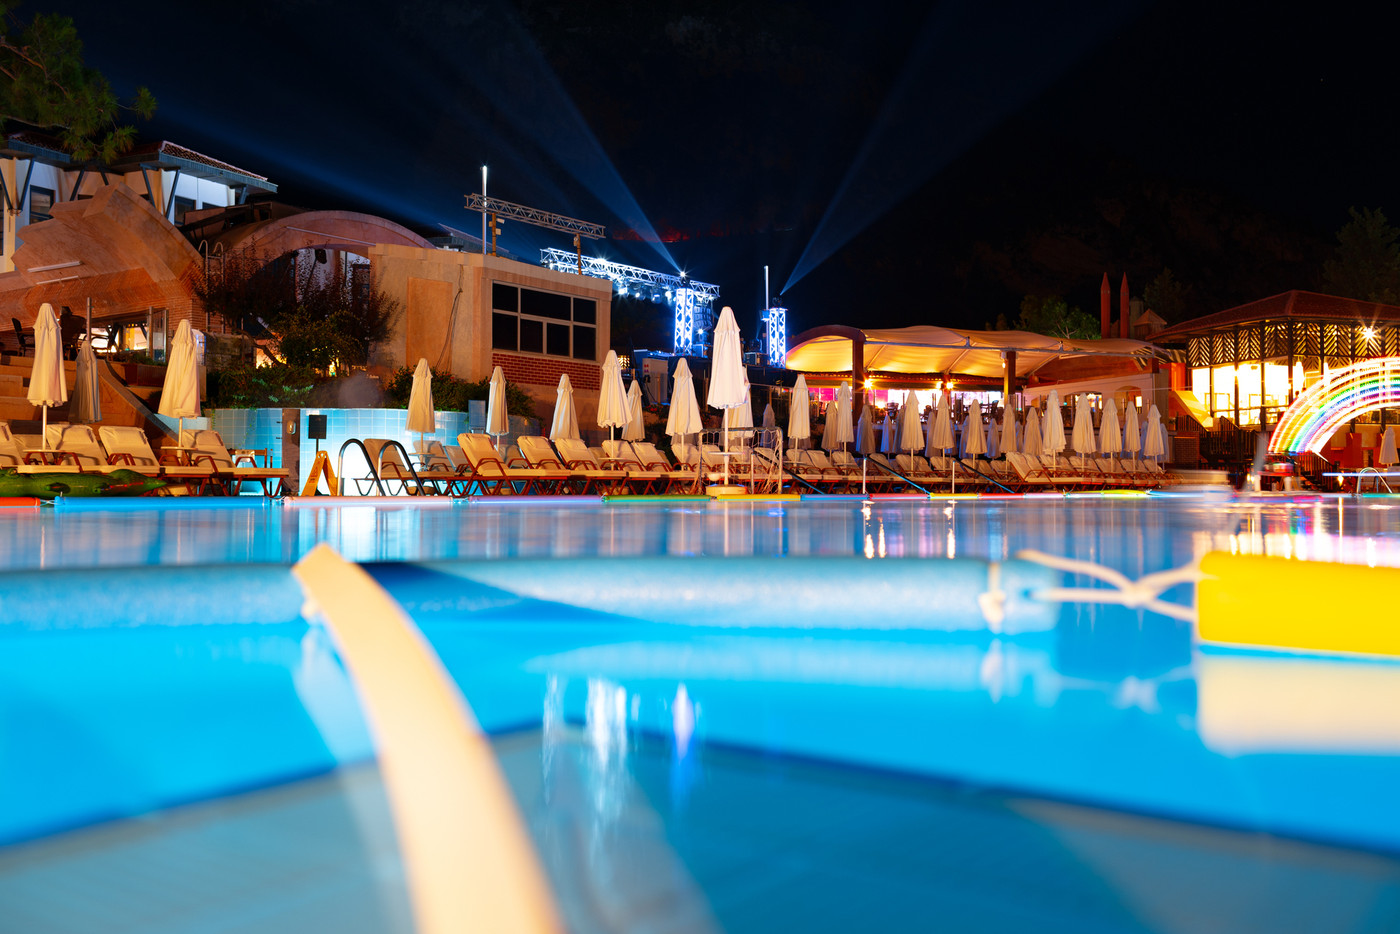 Swimming pool at a luxury resort at night time